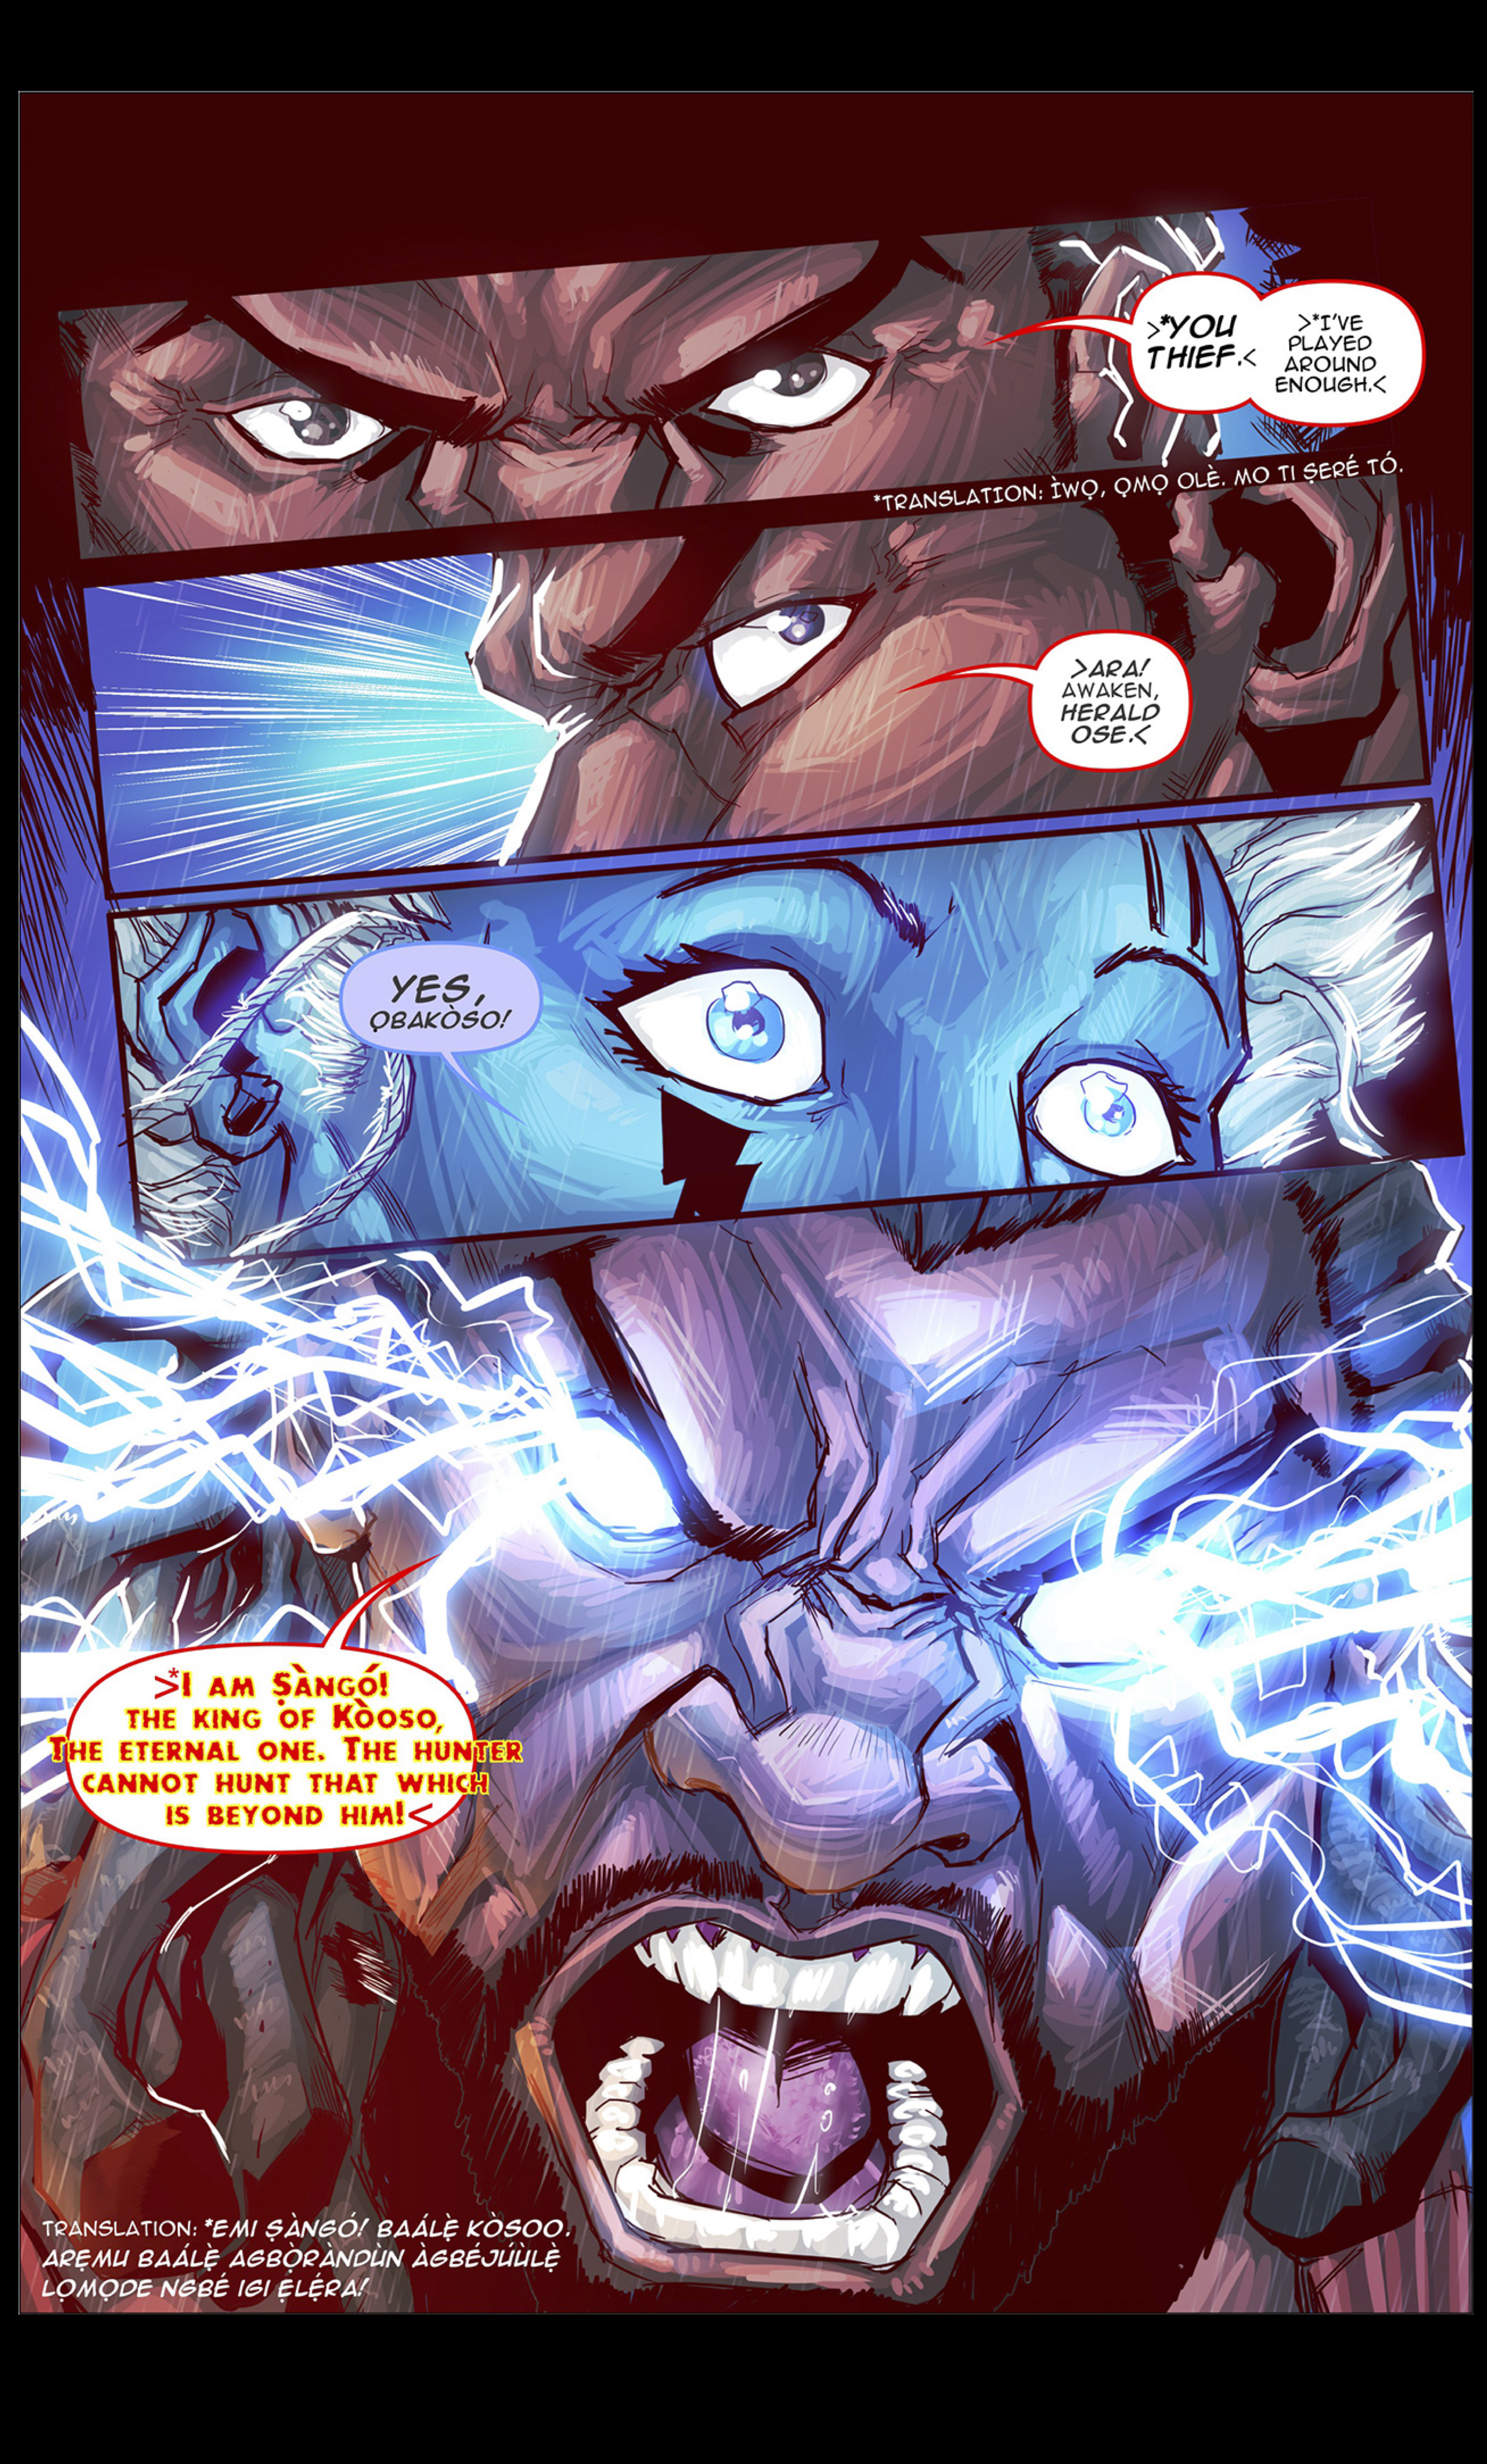 wrath of the god Sango in visionary ascension comic